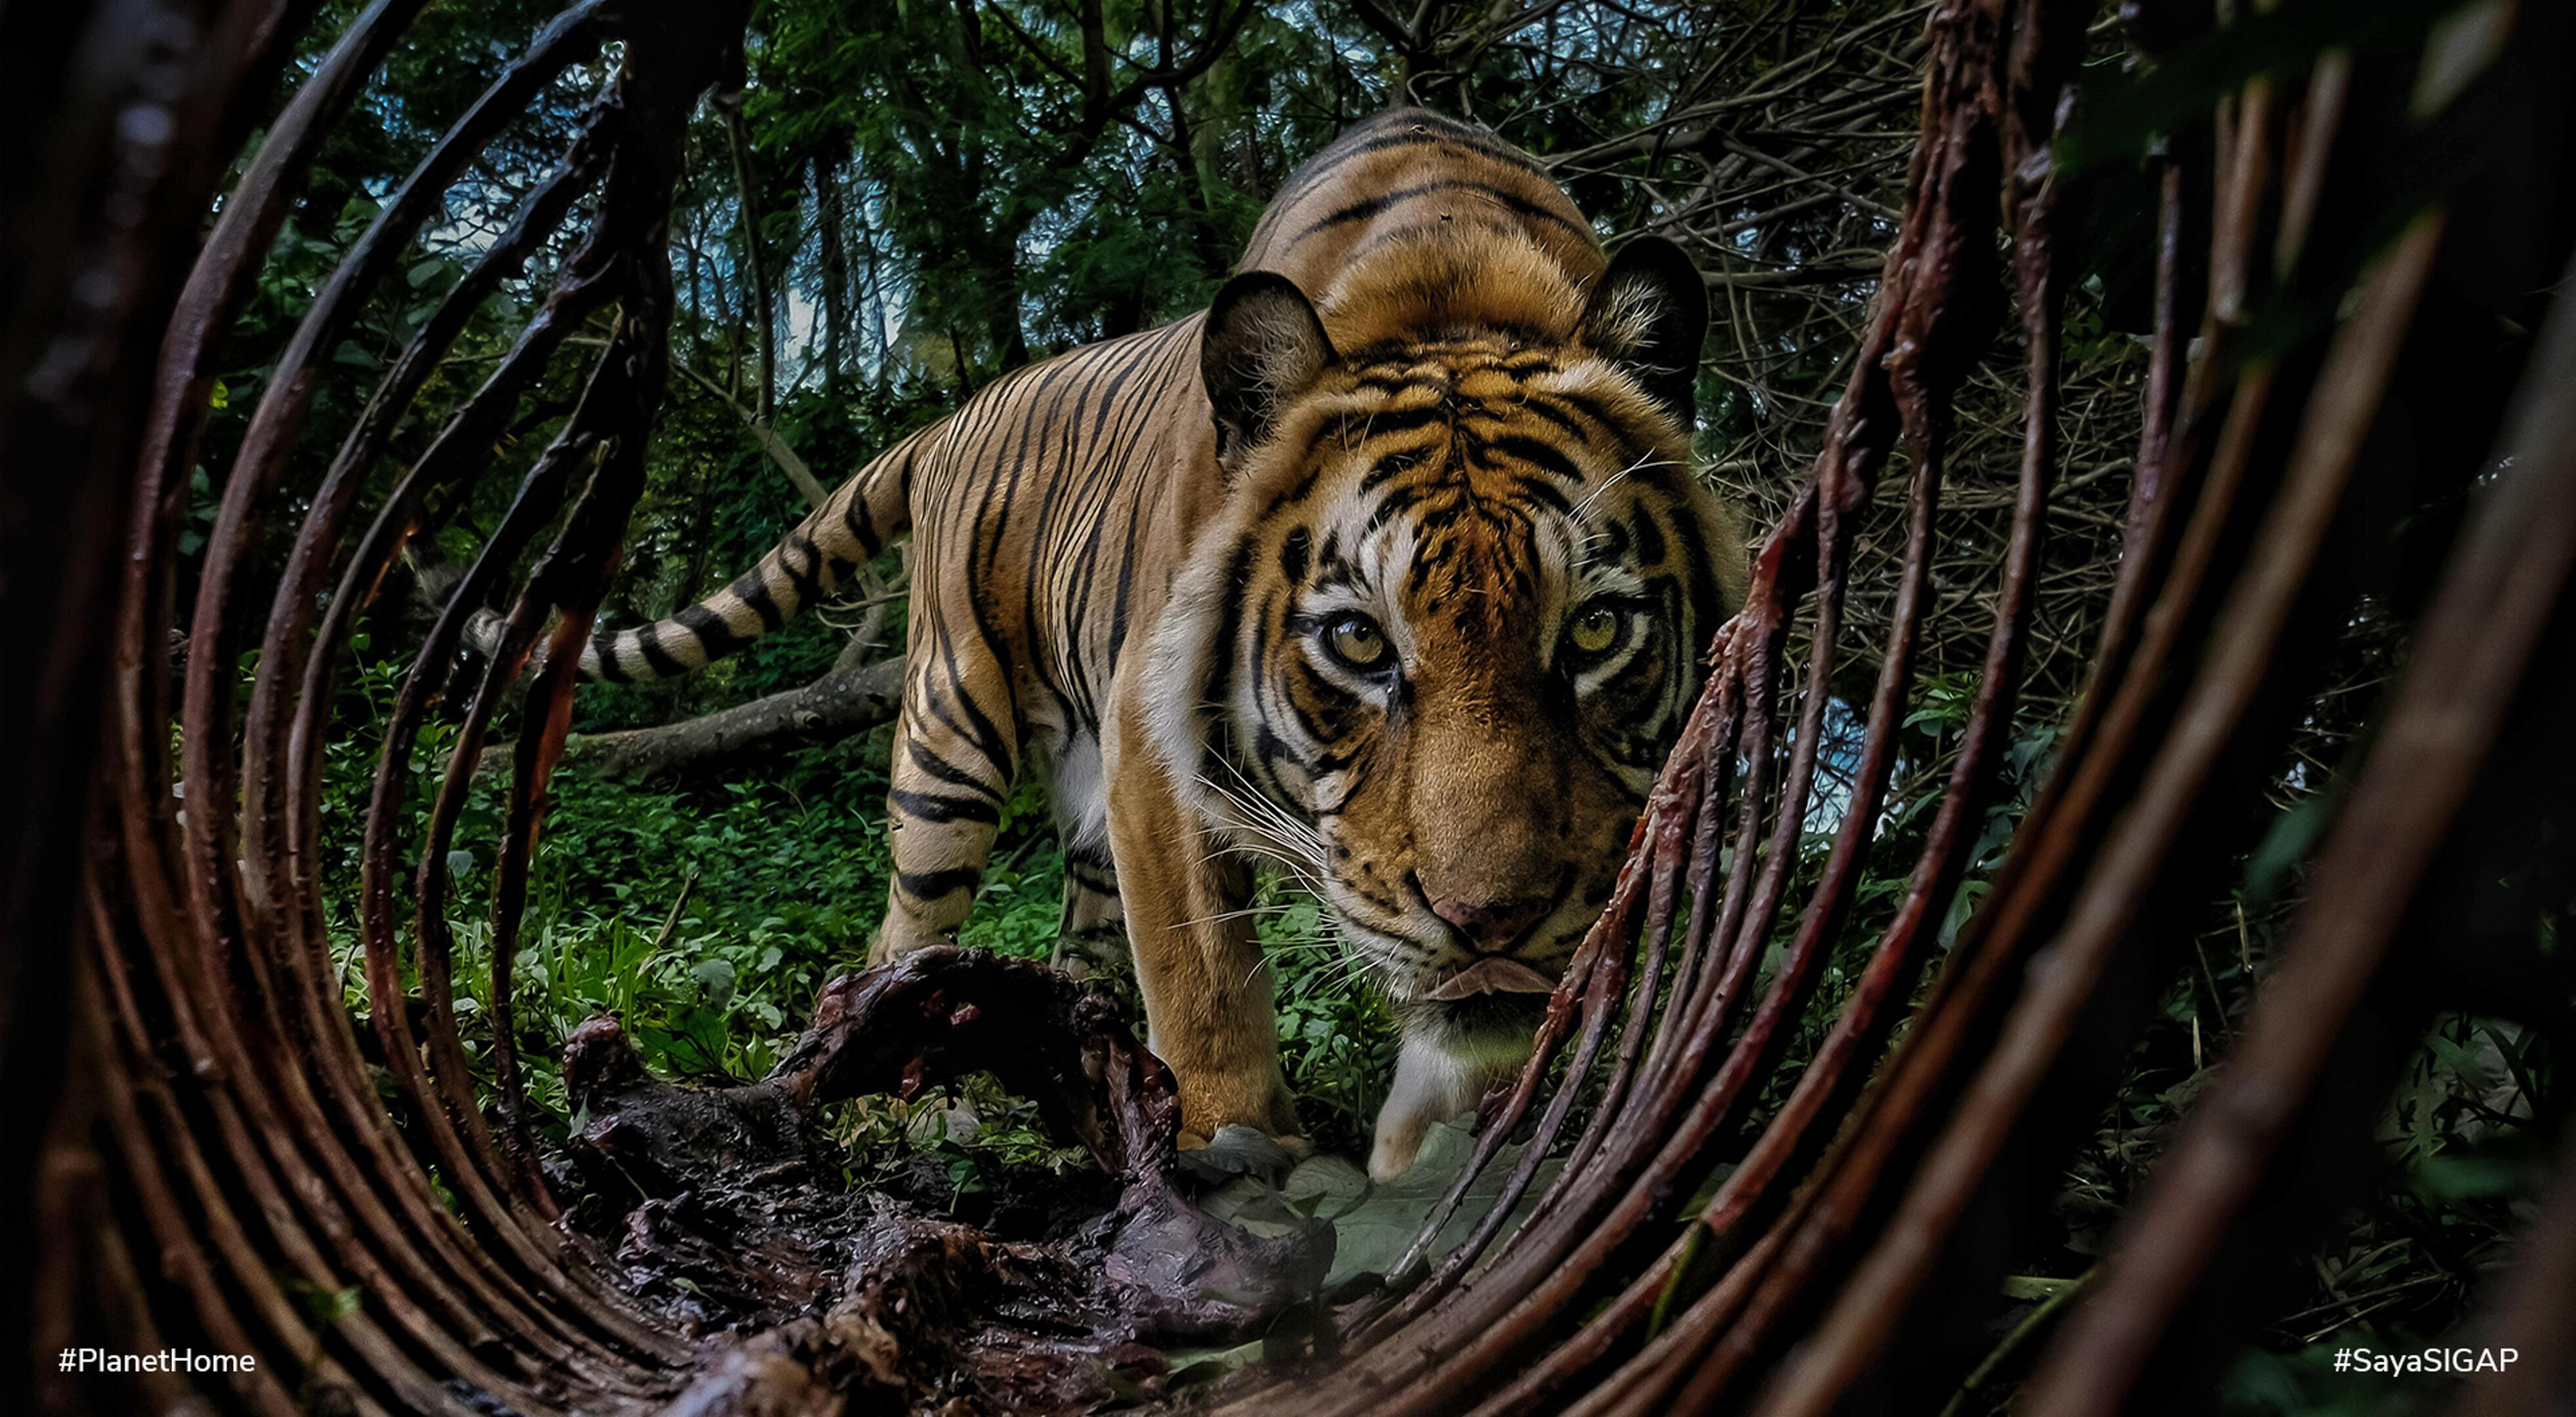 A tiger was caught on camera pulling at the bones of an animal on the edge of indonesia's rainforest.